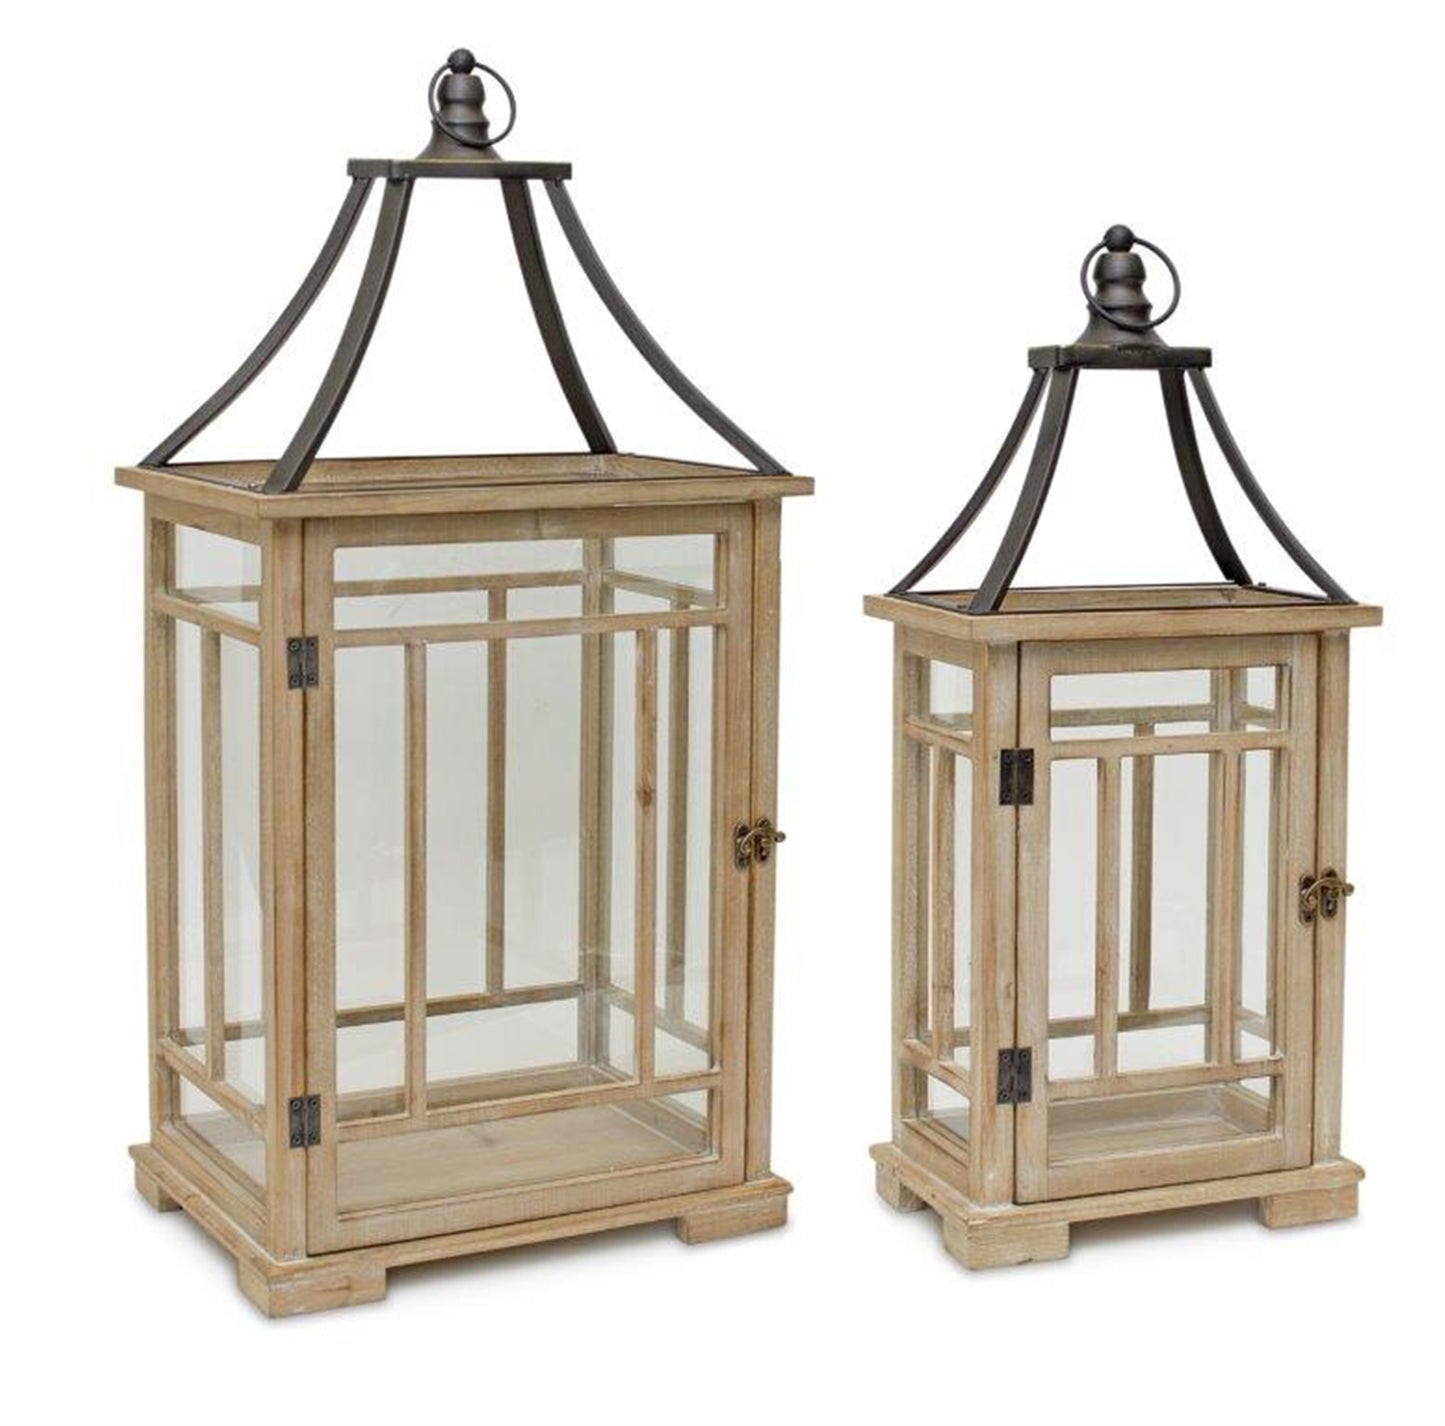 Natural Wood Lantern with Open Metal Lid (Set of 2)